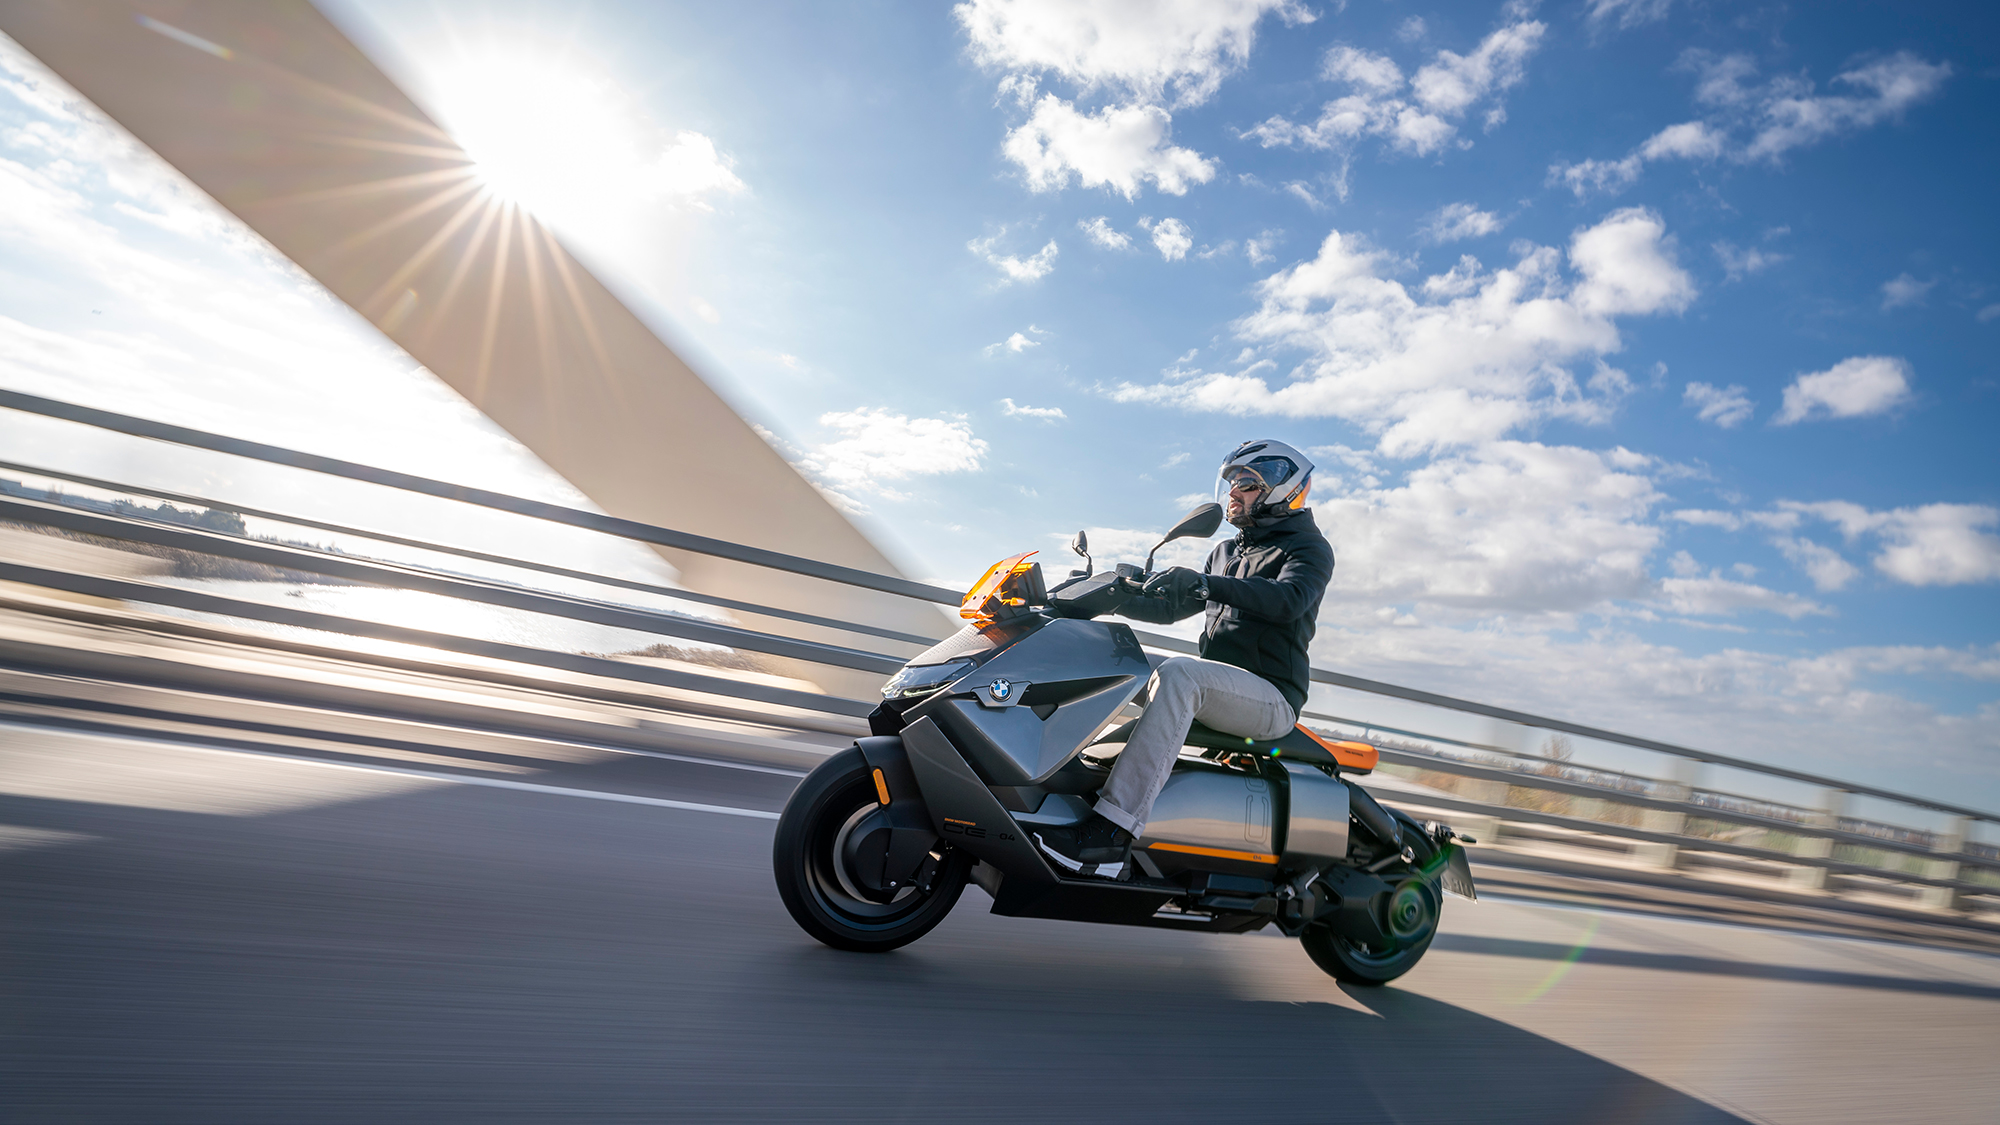 BMW’s electric scooter will hit 75 mph and has motorcycle vibes